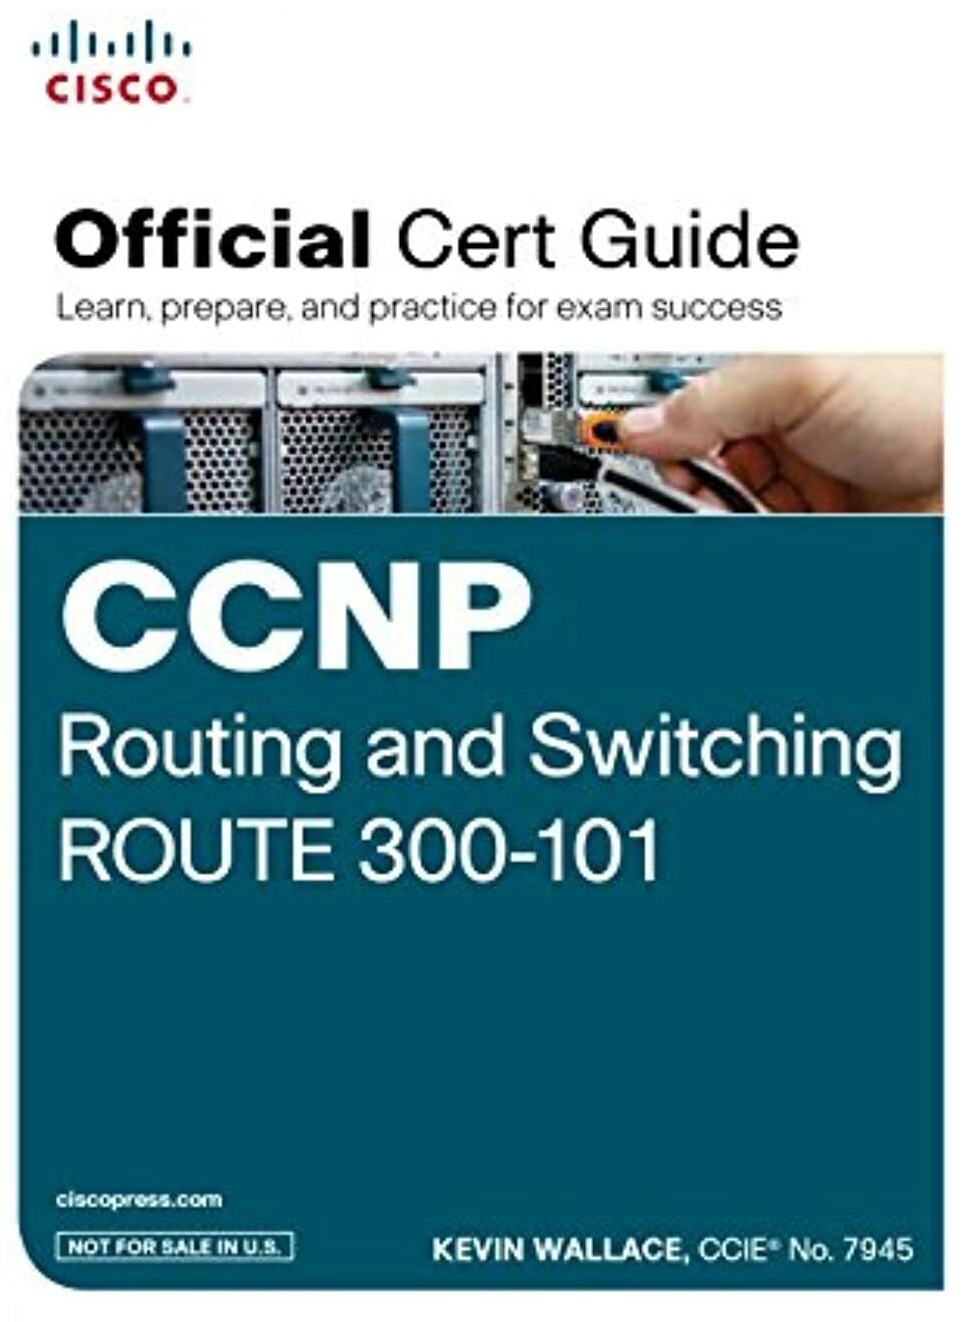 CCNP_Route